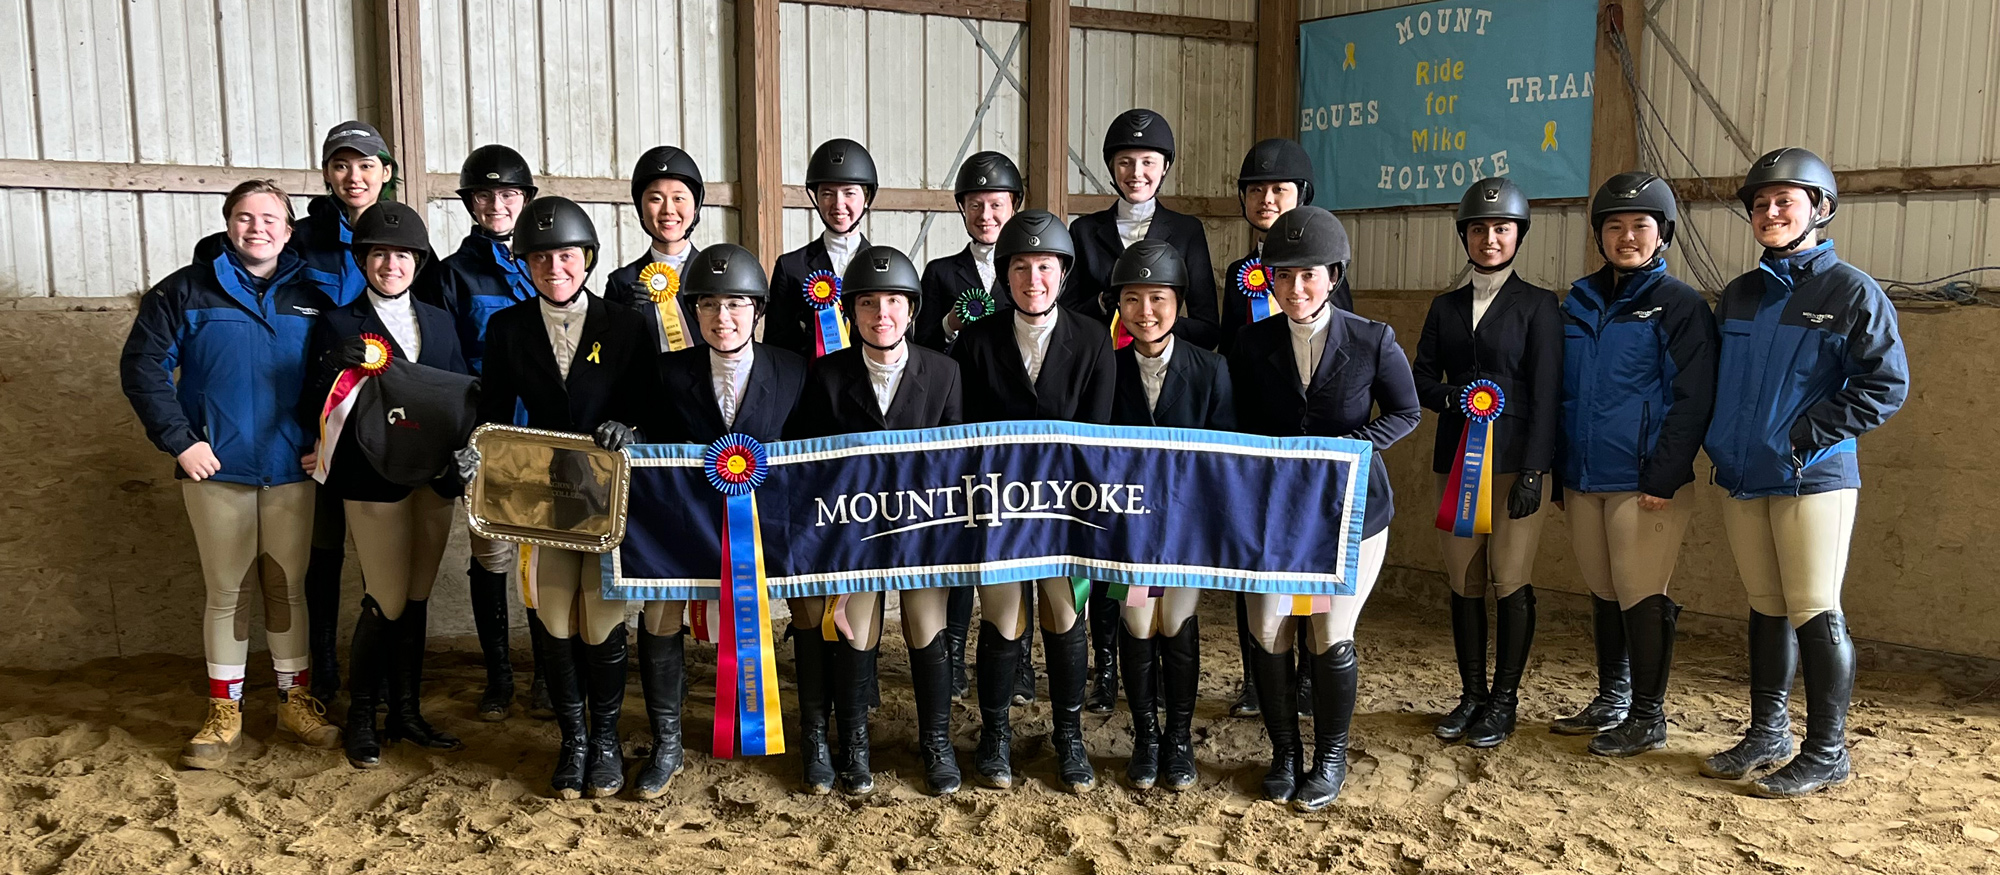 Equestrian team claims team title at Region 3 Championships